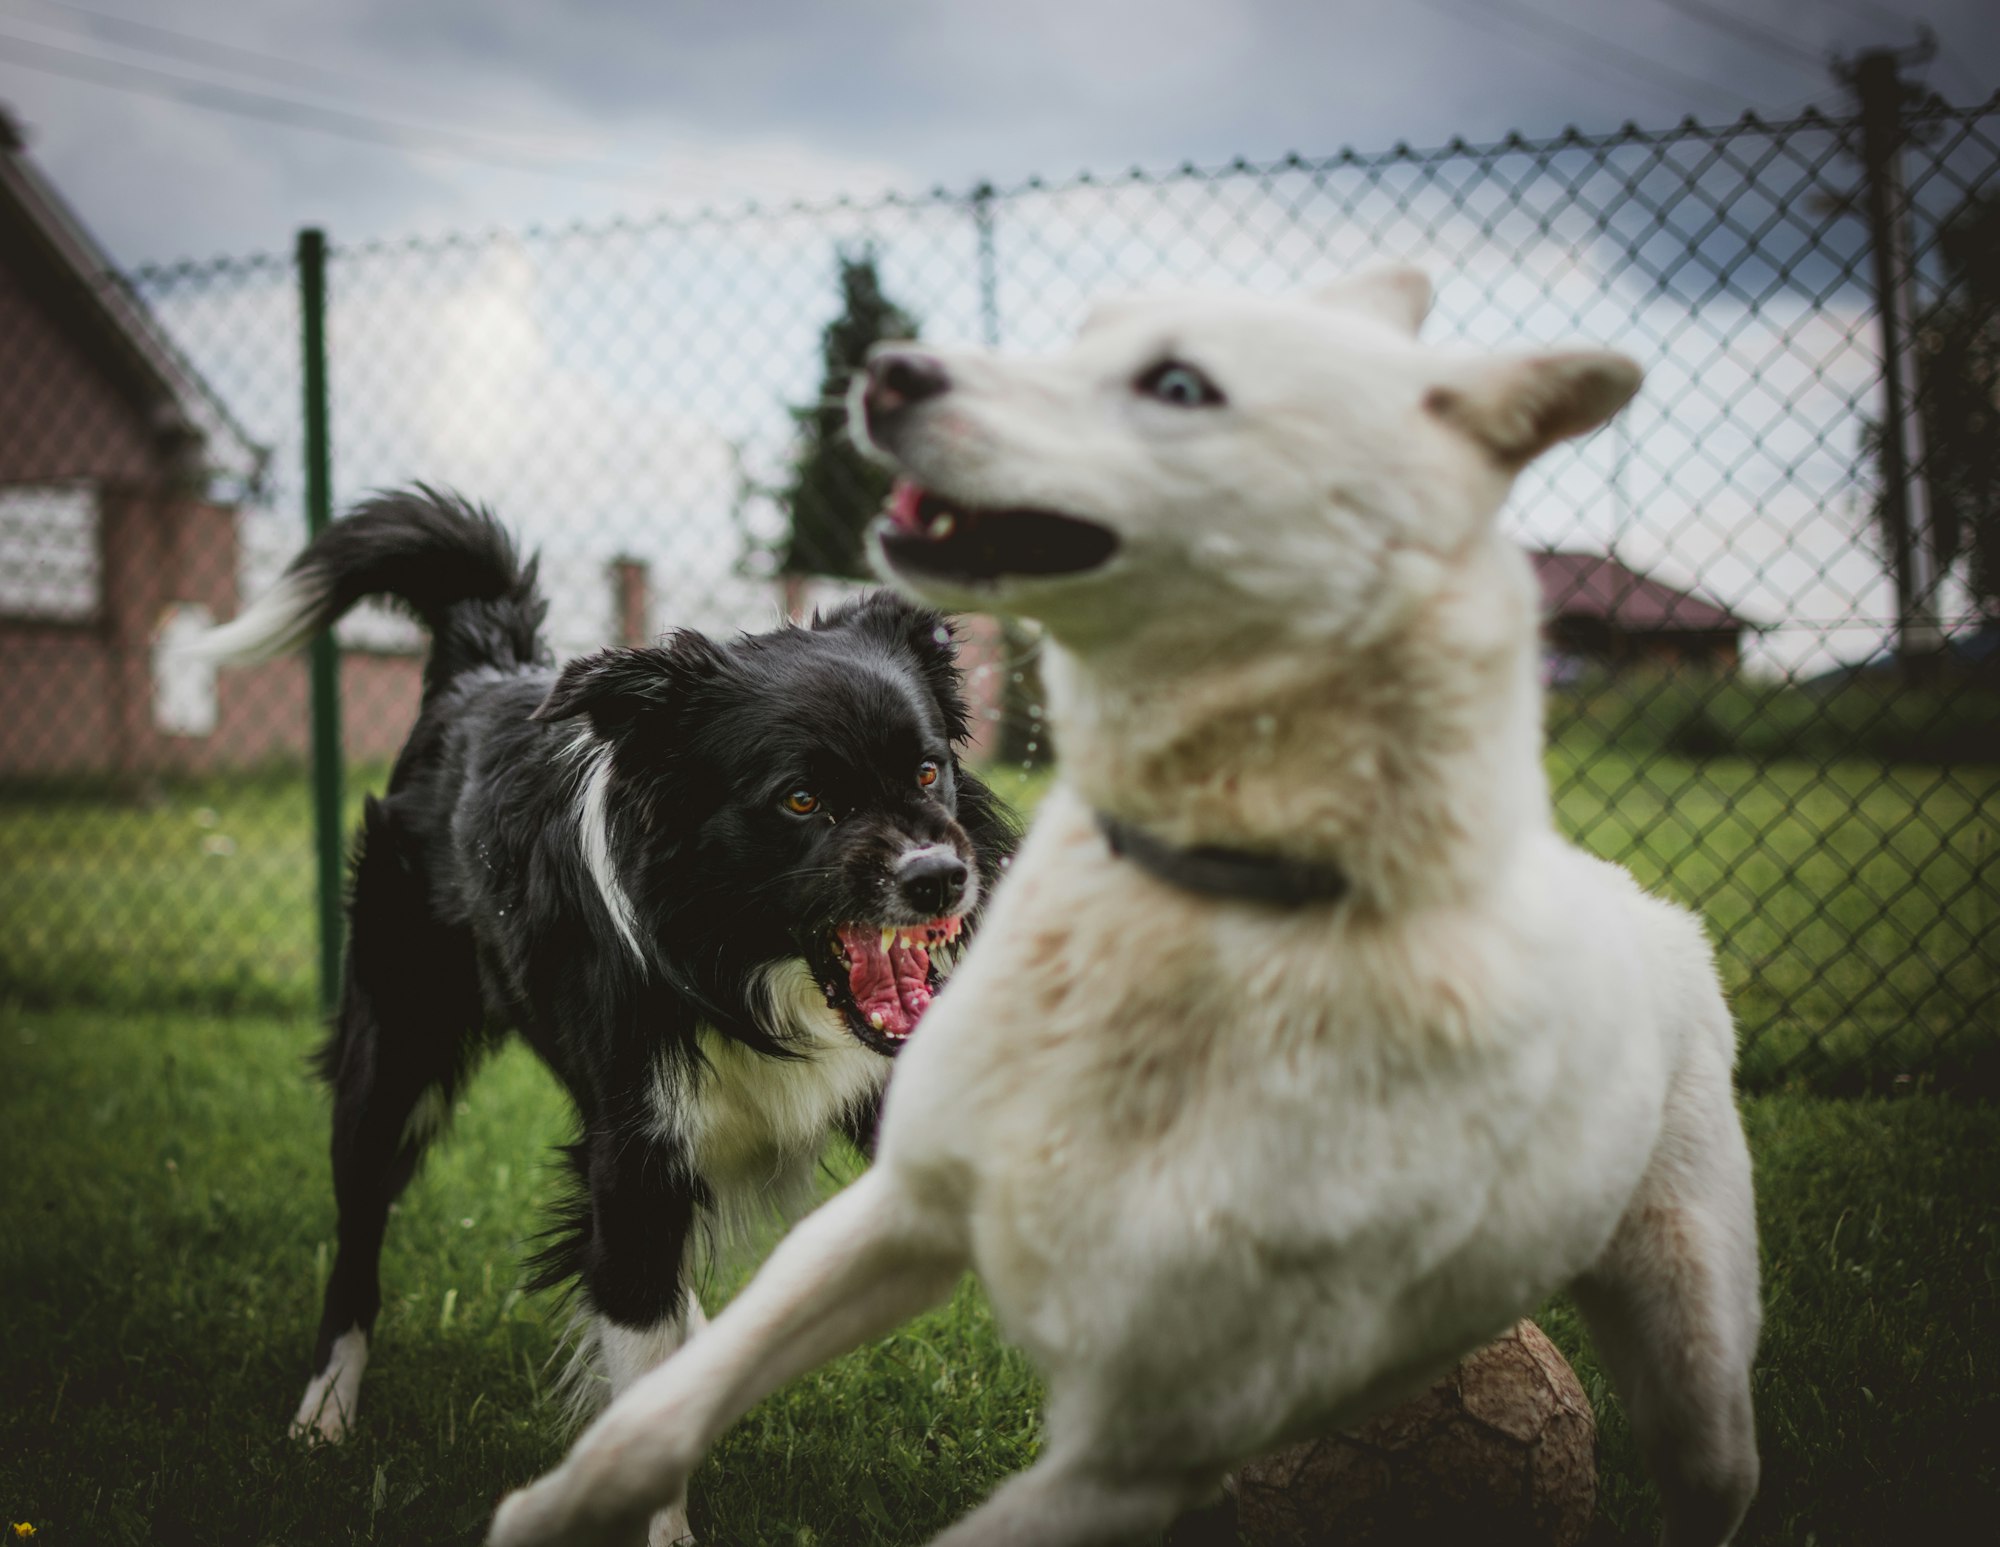 The bordercollie (Max) is my dog and the husky (Marley) is from my good friend Marek Szturc (you can also check unsplash account). They are two good friends and the really like playing together, especially Marley :) Sometimes Max prefers some toys and that is exactly the reason of Max’s expression… Marley was trying to take his toy :D